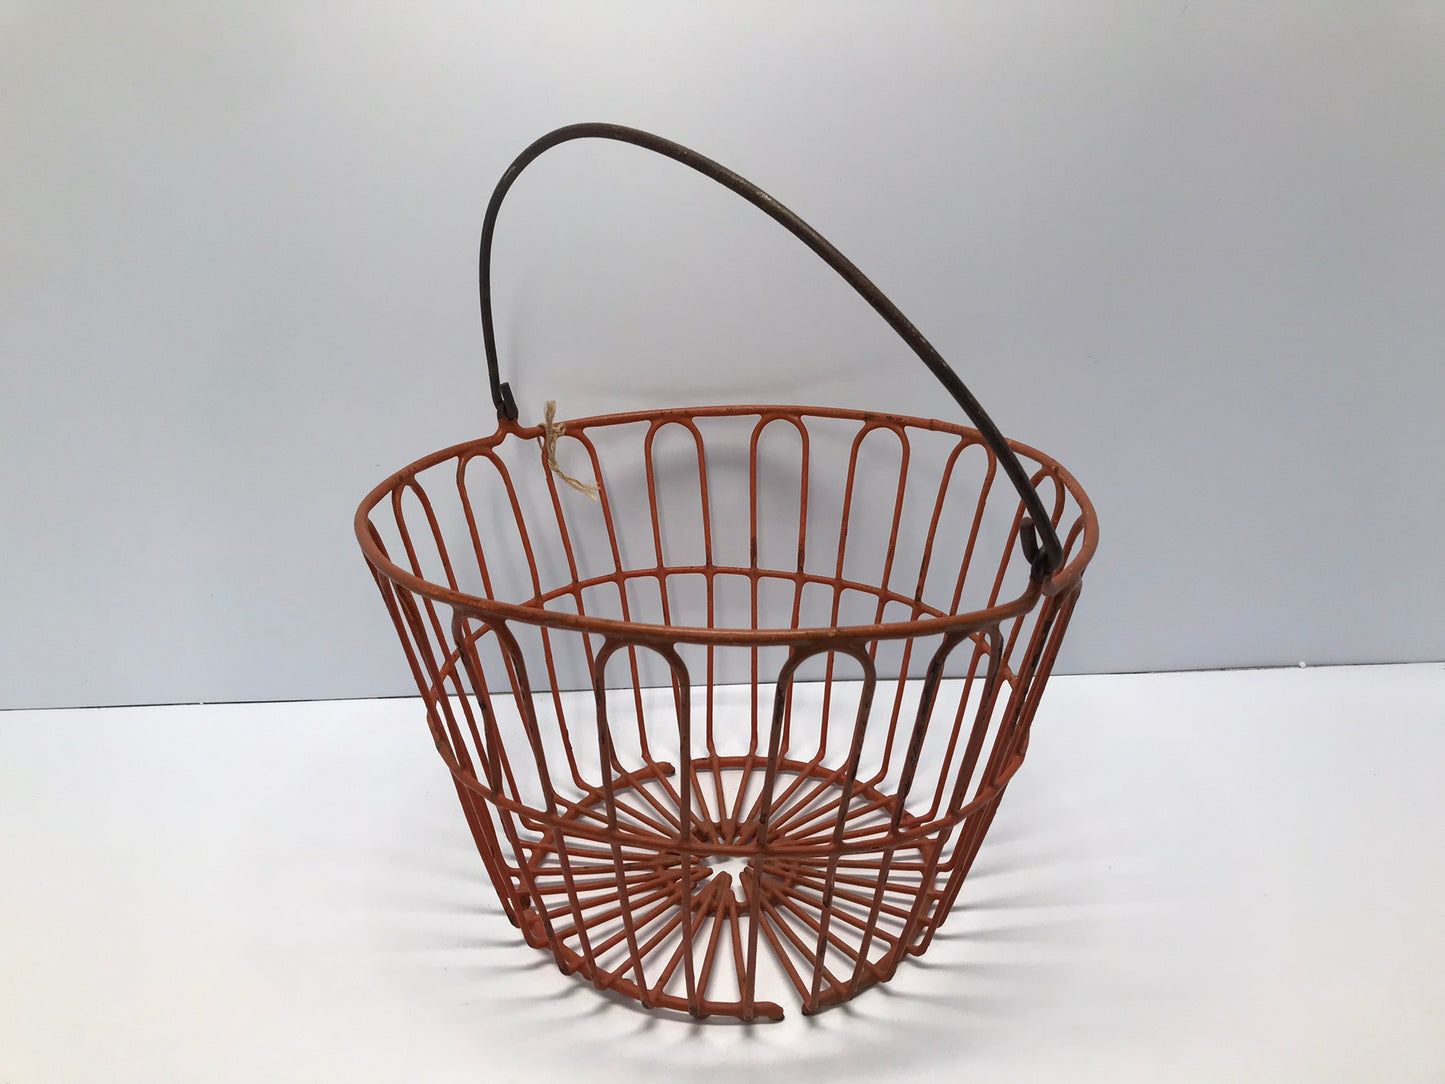 Antique Authentic Vintage Egg Basket - Old Orange  Rubber-coated Wire Gathering Basket - Rustic Farm house Decor - Large Round Produce Container RARE